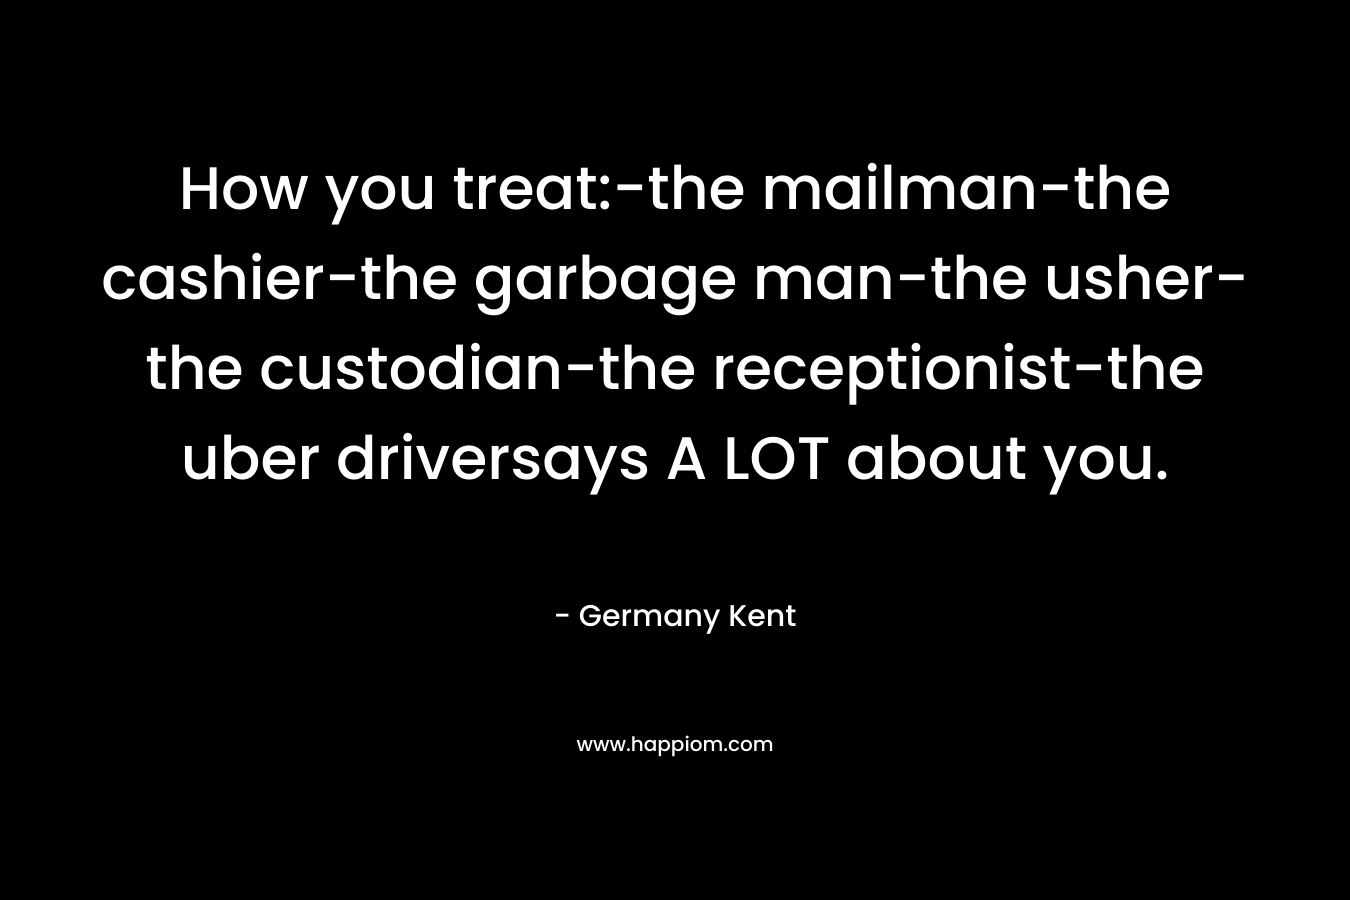 How you treat:-the mailman-the cashier-the garbage man-the usher-the custodian-the receptionist-the uber driversays A LOT about you.